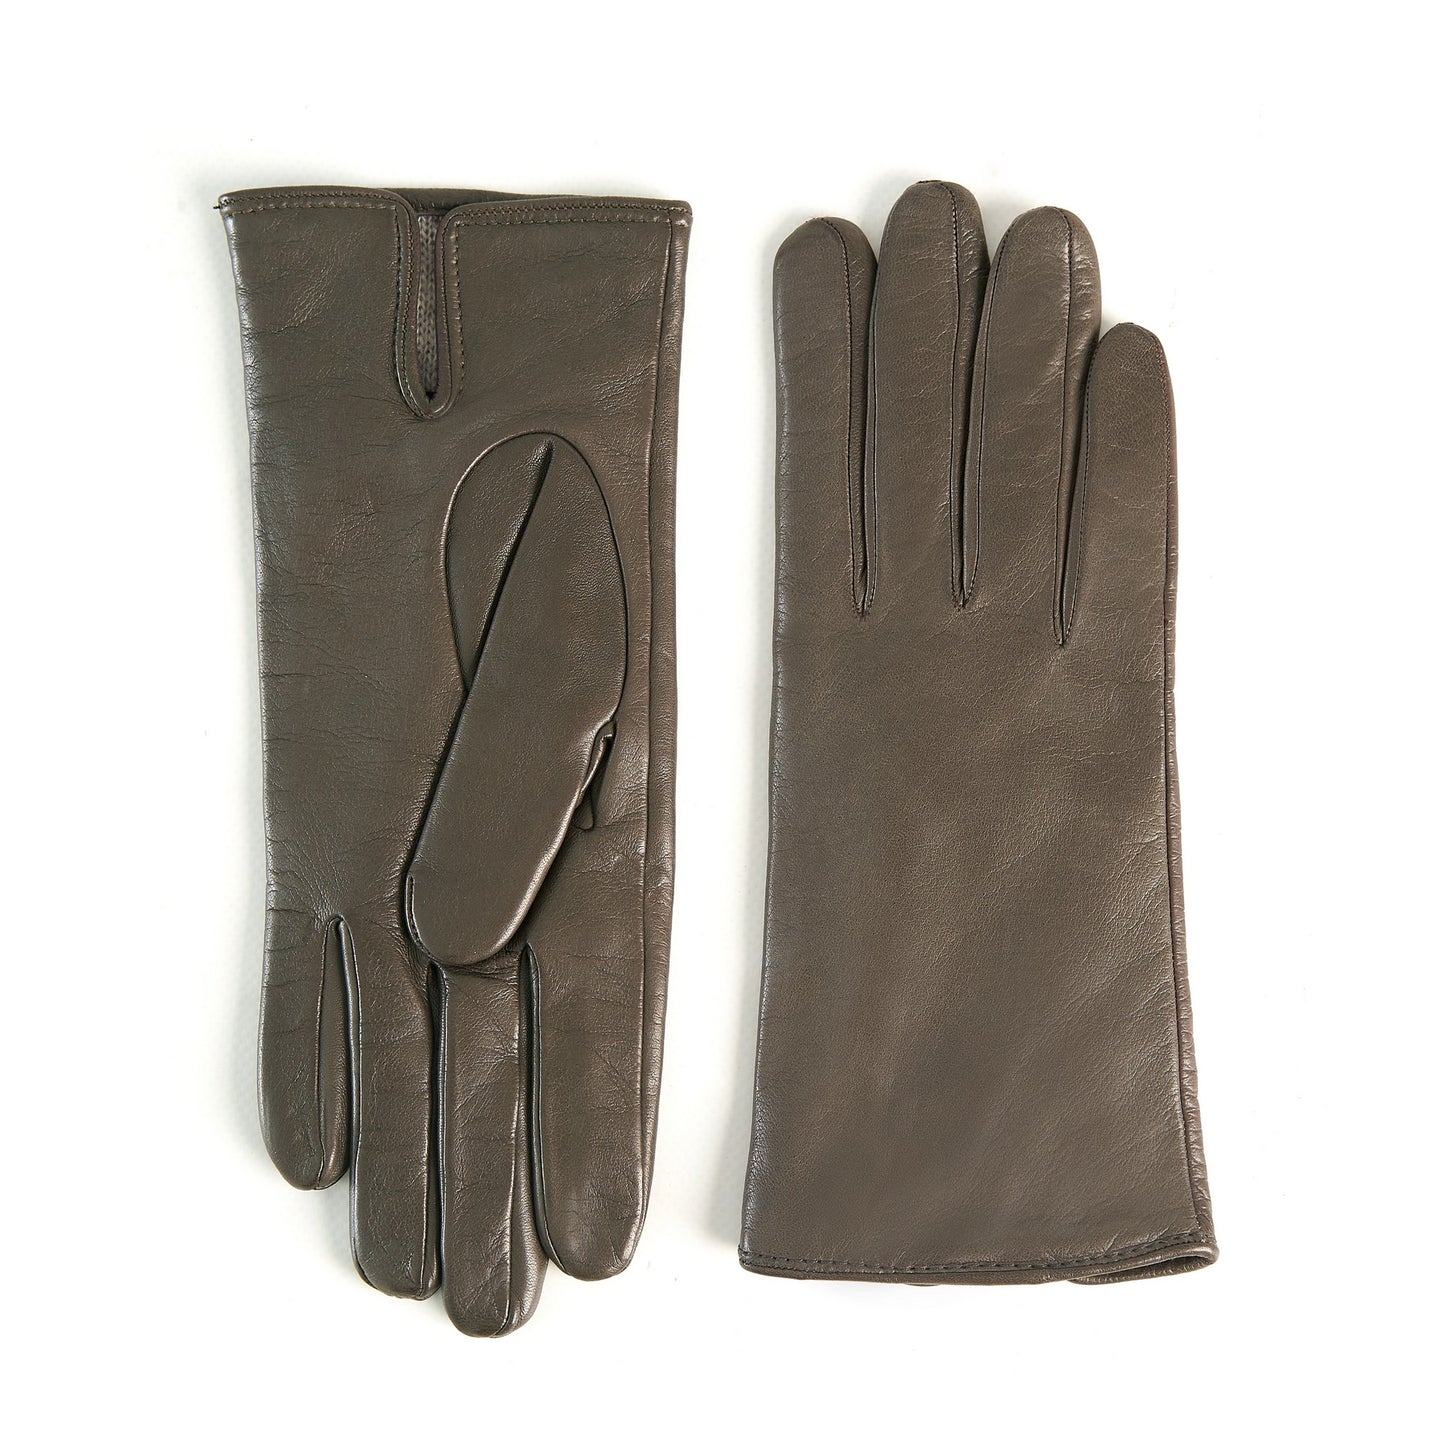 Women’s basic mud soft nappa leather gloves with palm opening and mix cashmere lining